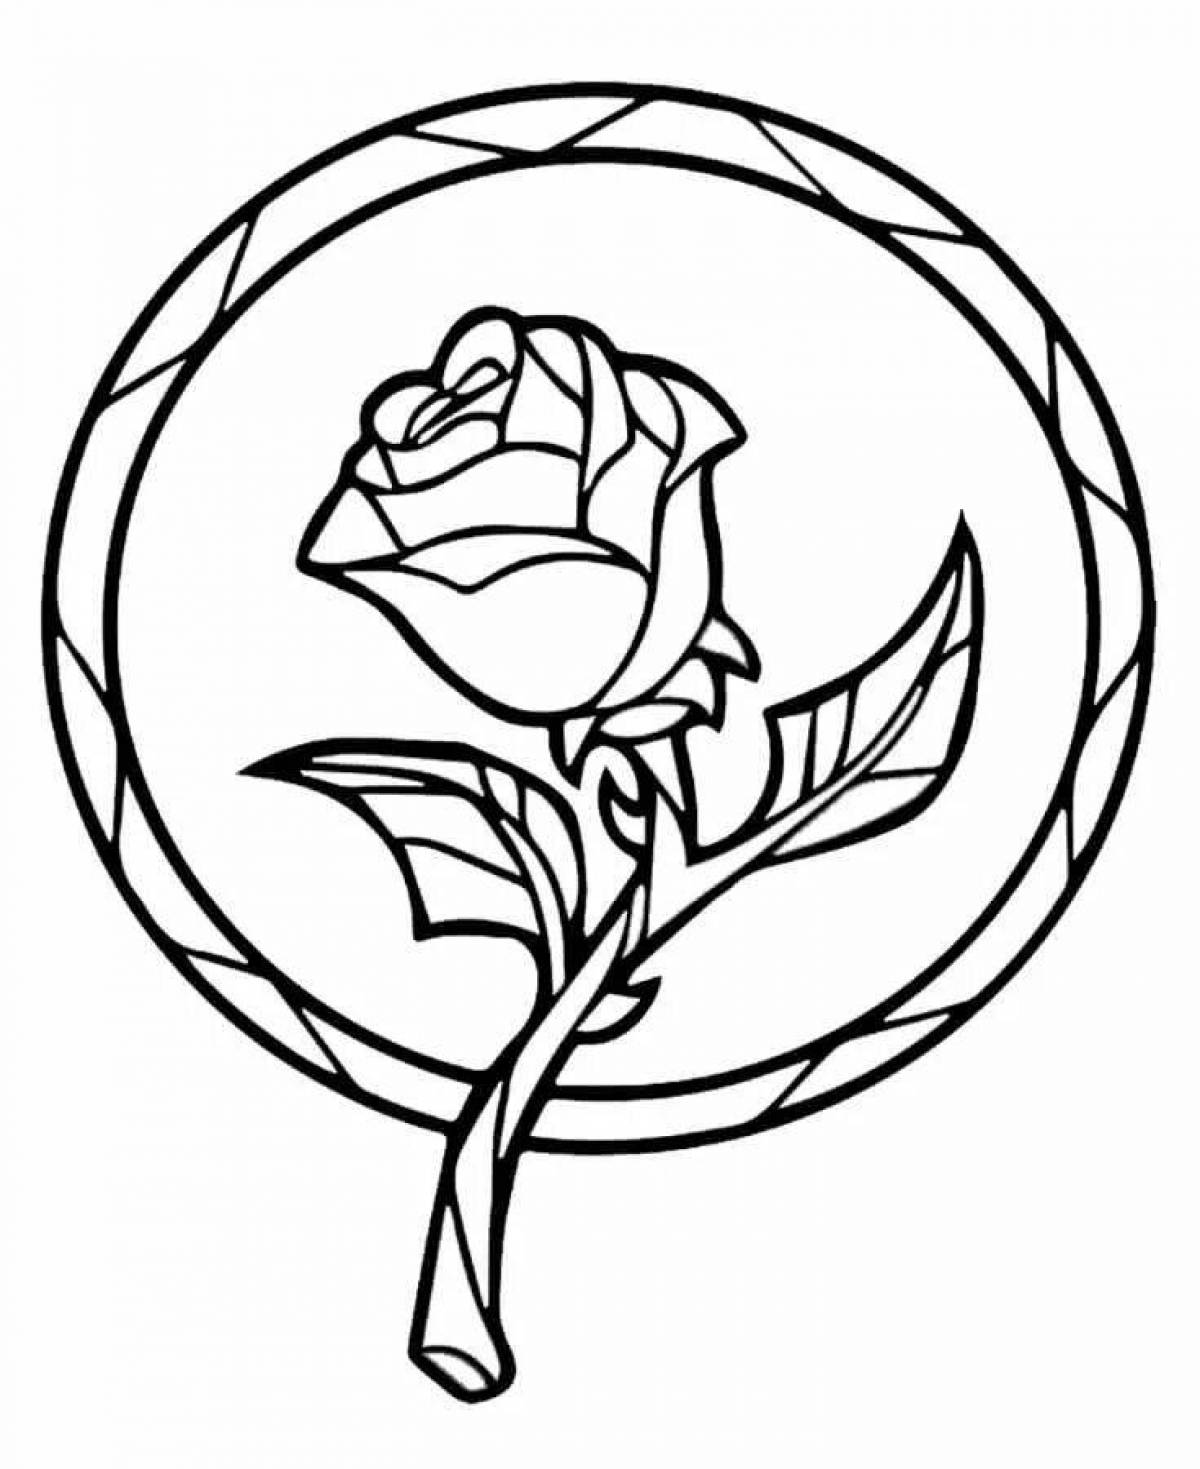 Charming coloring picture of a rose